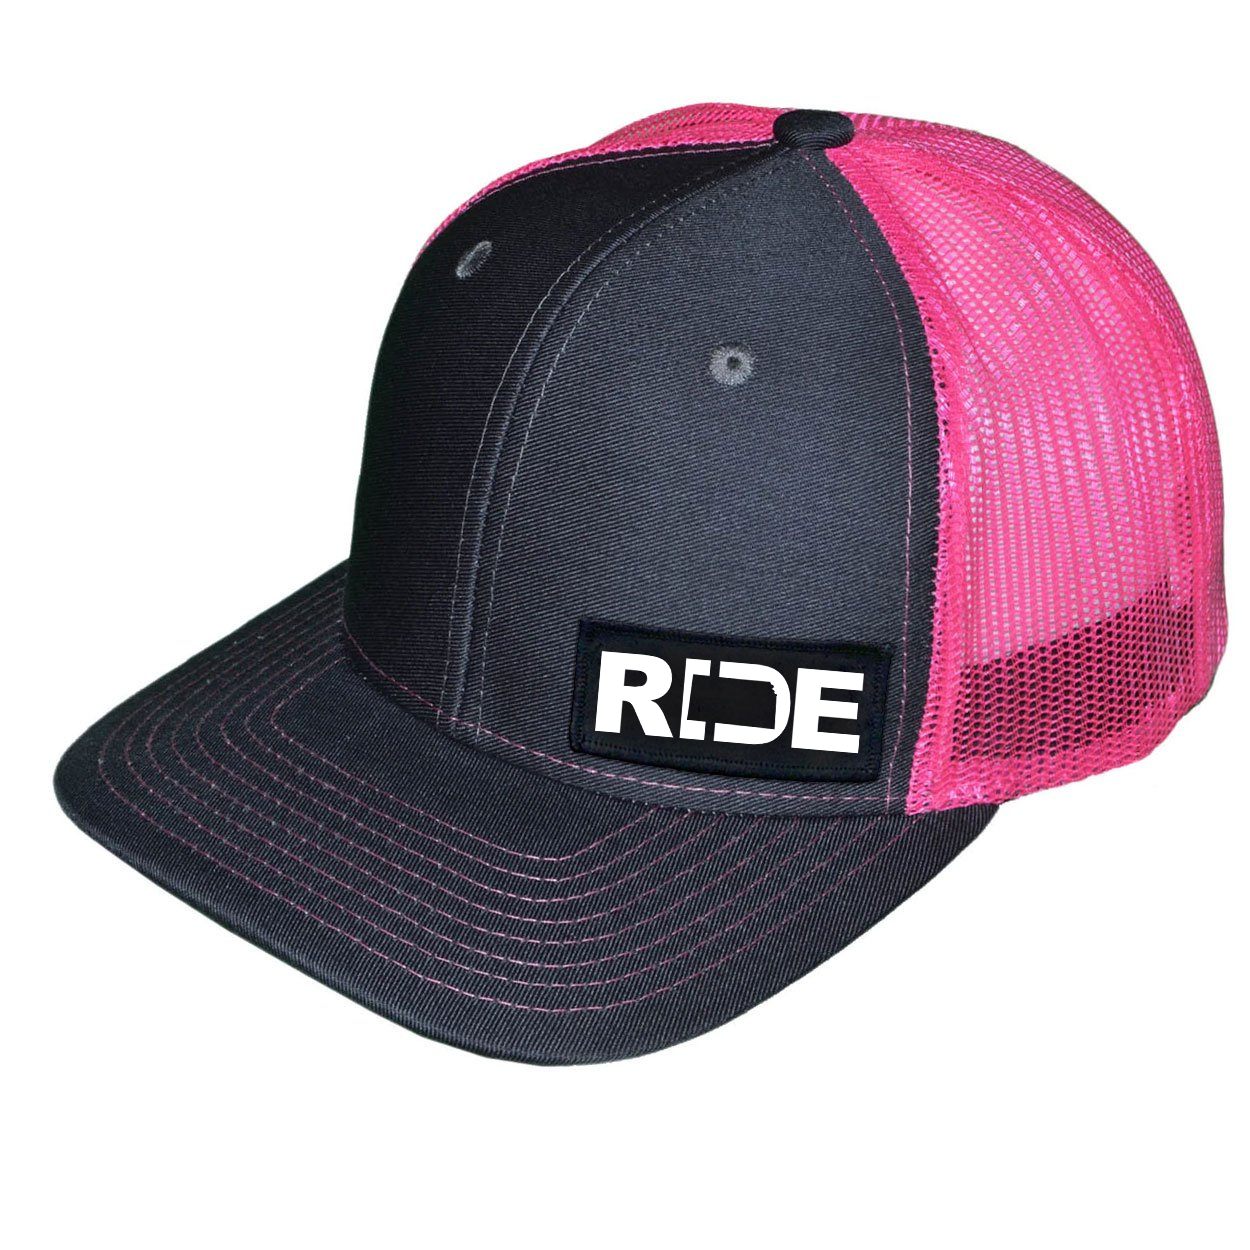 Ride Kansas Night Out Woven Patch Snapback Trucker Hat Charcoal/Neon Pink (White Logo)